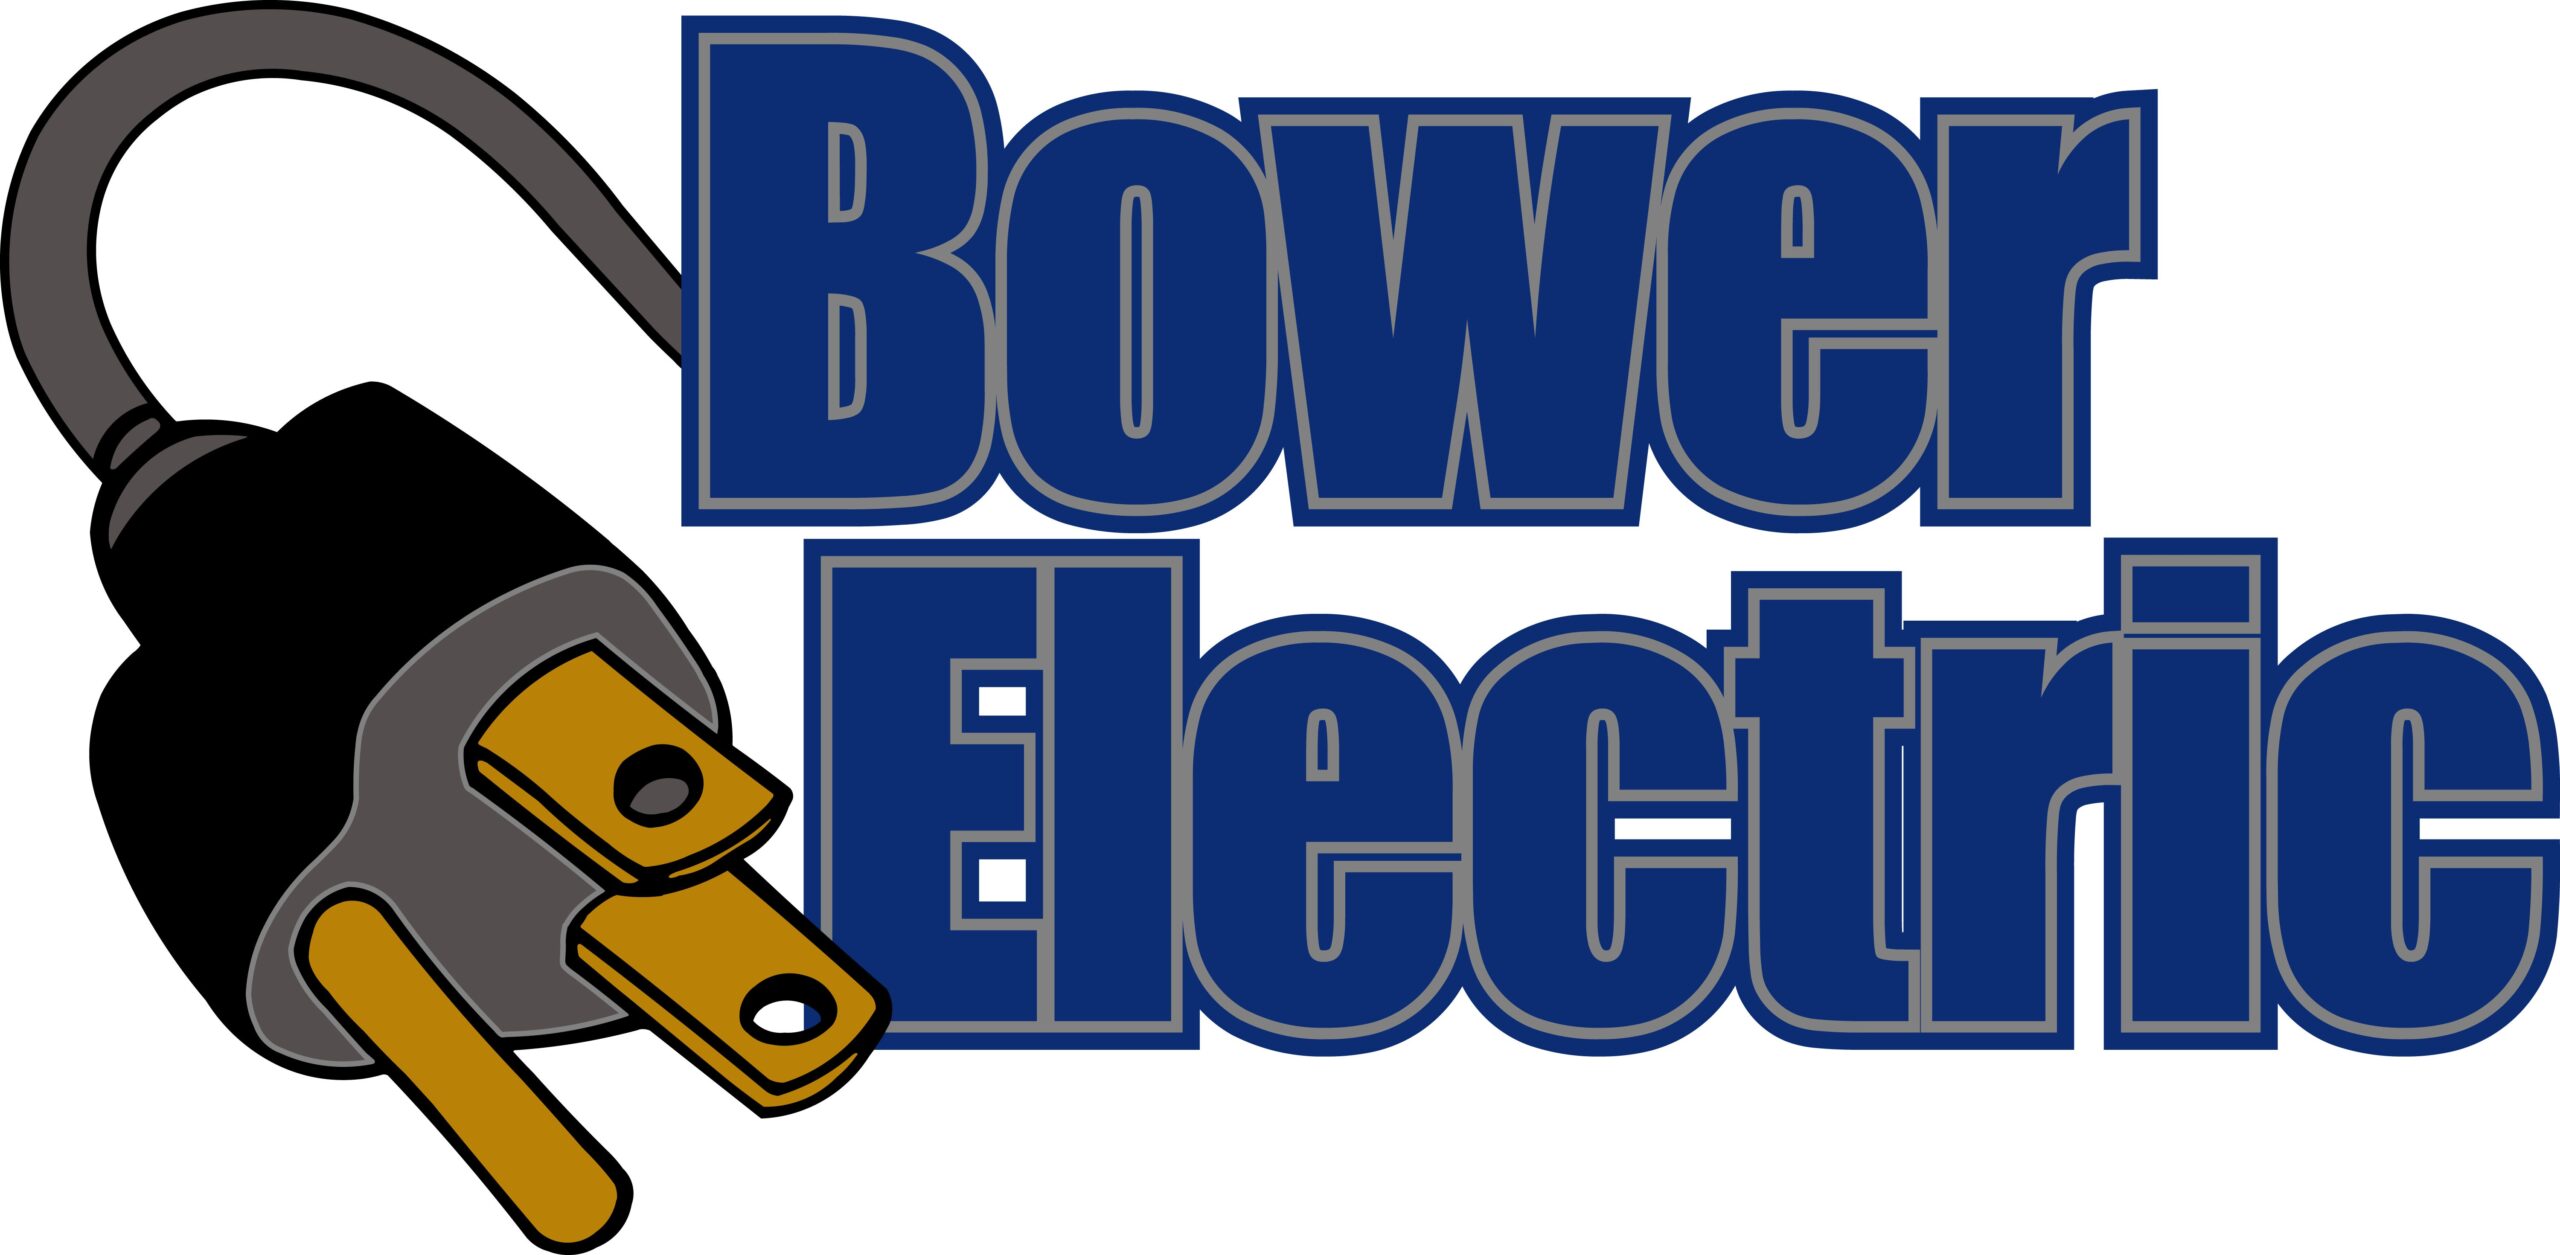 Bower Electric